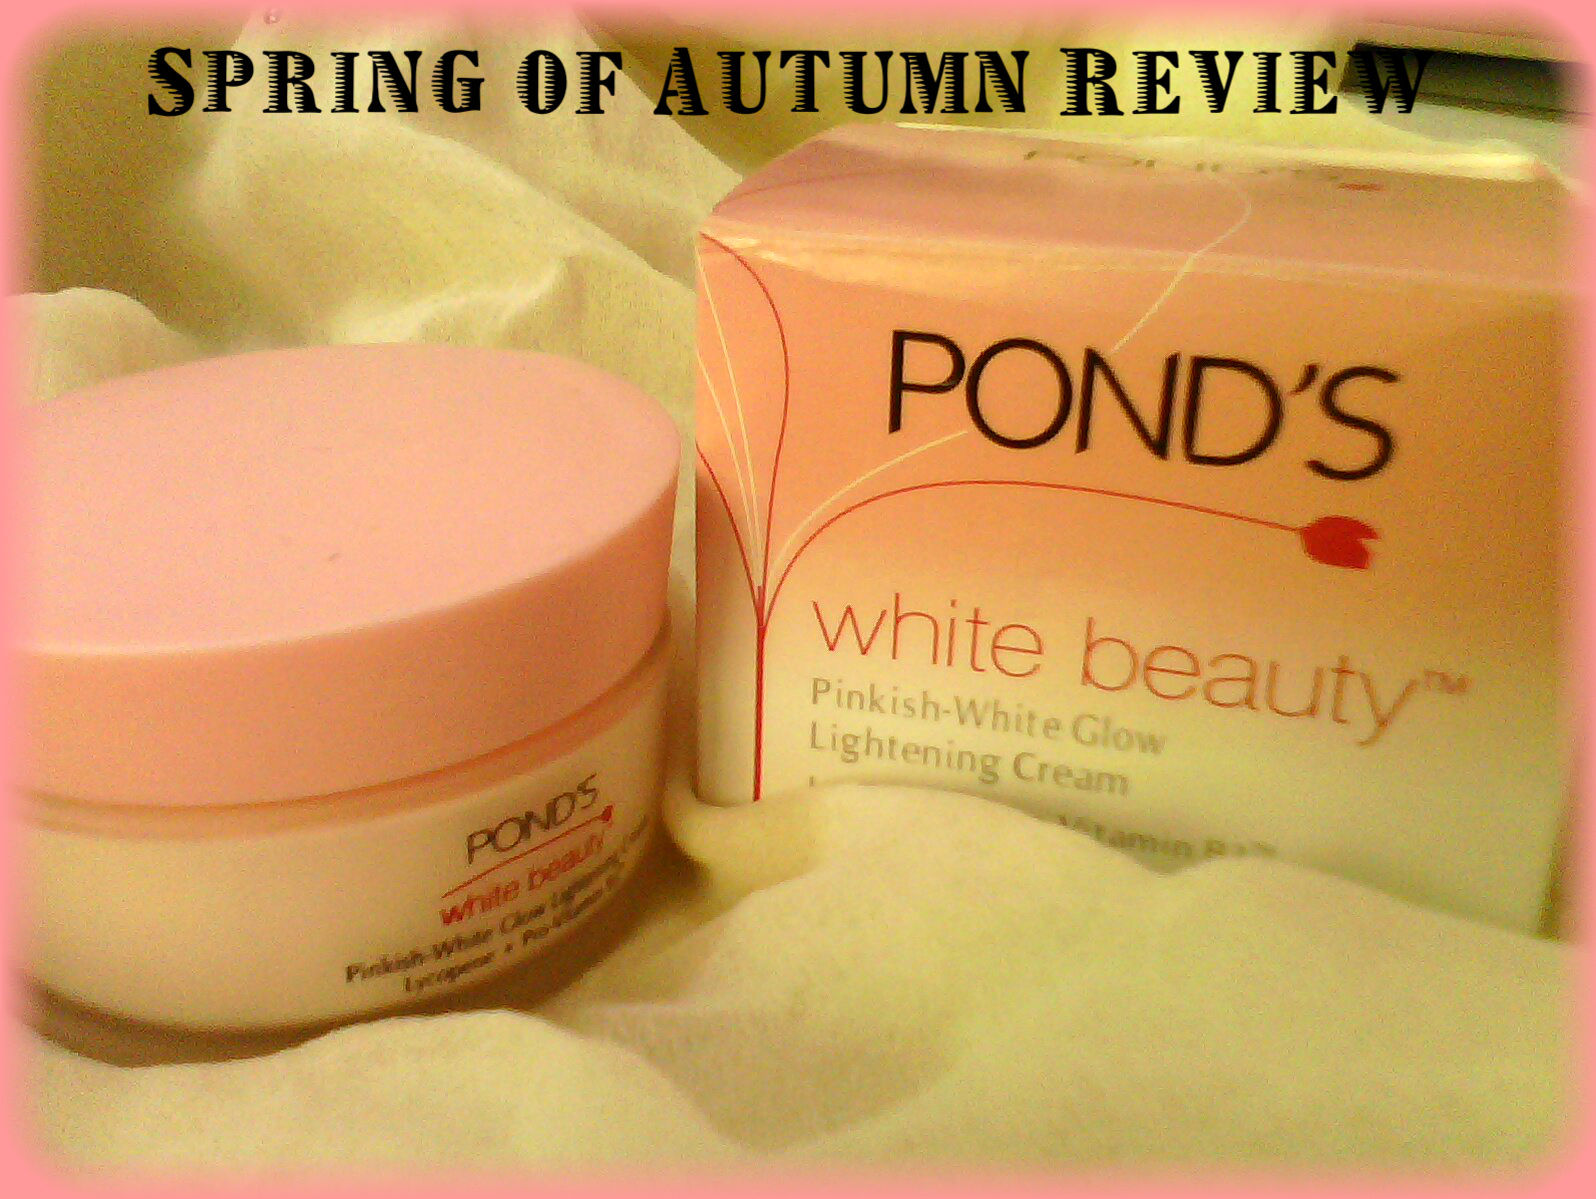 Ponds White Beauty Pinkish White Glow:Expectations & Results